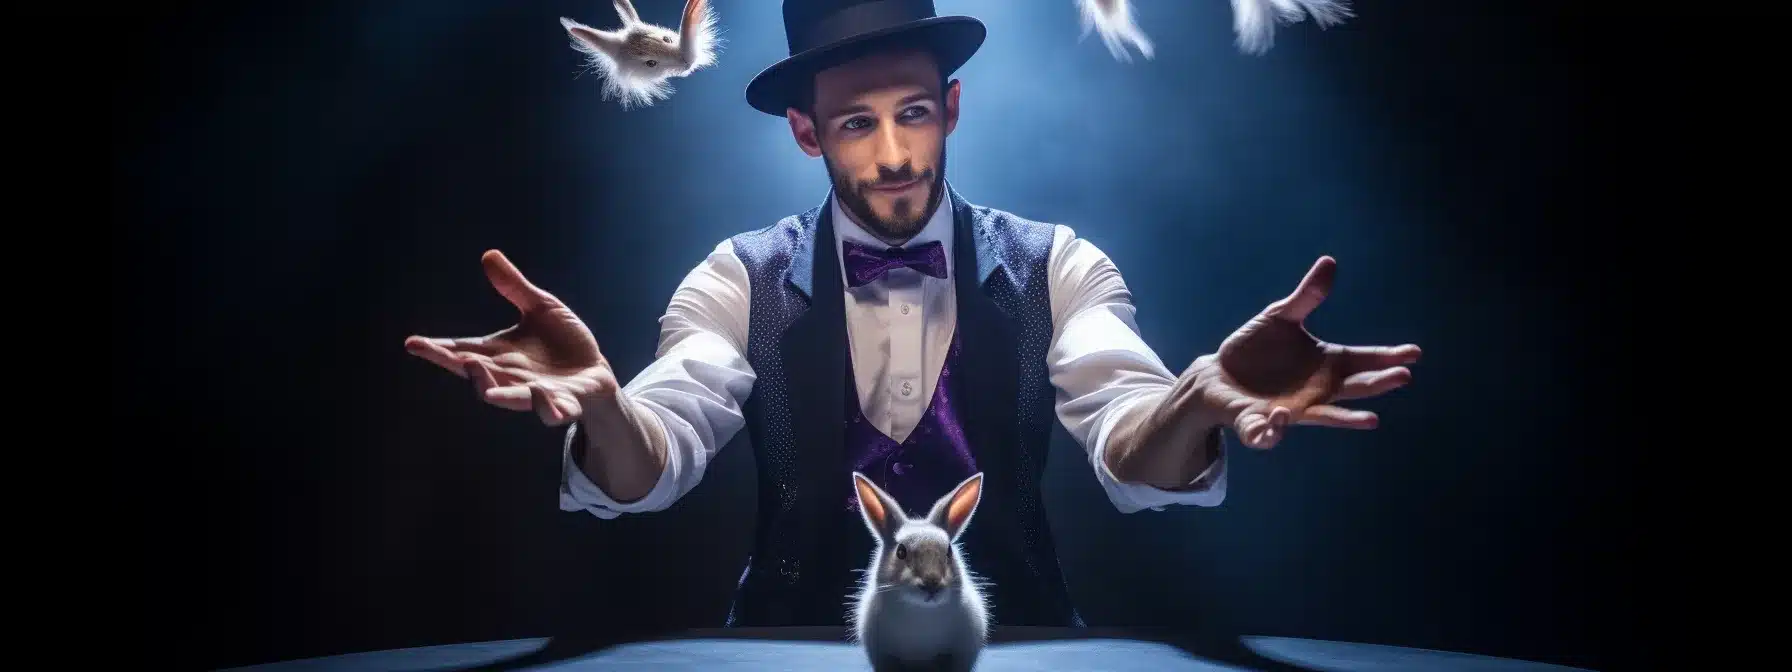 A Magician Performing A Mesmerizing Trick With A Rabbit Bursting Out Of A Hat.